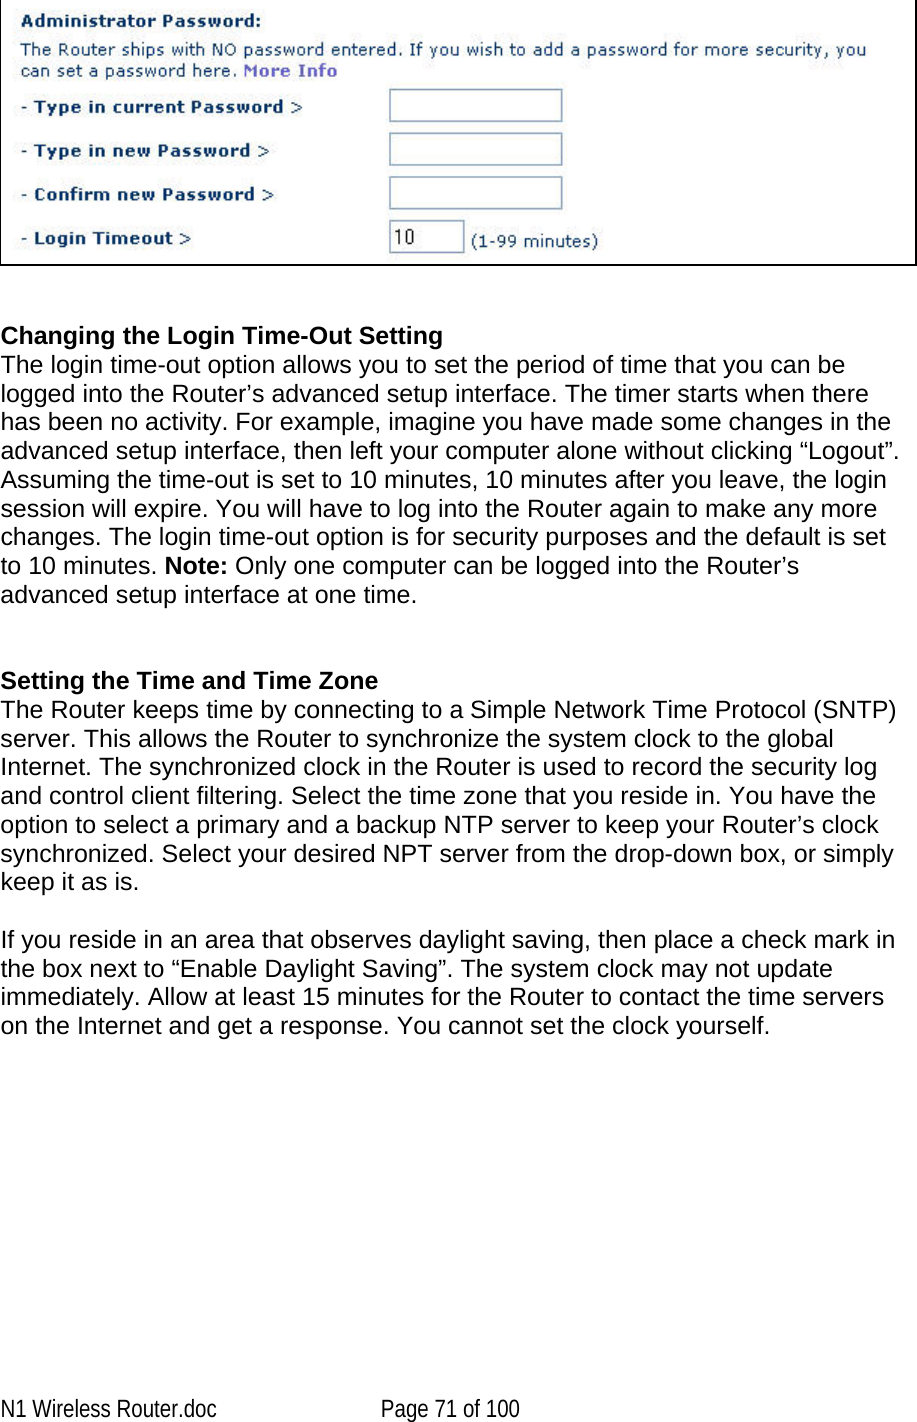      Changing the Login Time-Out Setting The login time-out option allows you to set the period of time that you can be logged into the Router’s advanced setup interface. The timer starts when there has been no activity. For example, imagine you have made some changes in the advanced setup interface, then left your computer alone without clicking “Logout”. Assuming the time-out is set to 10 minutes, 10 minutes after you leave, the login session will expire. You will have to log into the Router again to make any more changes. The login time-out option is for security purposes and the default is set to 10 minutes. Note: Only one computer can be logged into the Router’s advanced setup interface at one time.    Setting the Time and Time Zone  The Router keeps time by connecting to a Simple Network Time Protocol (SNTP) server. This allows the Router to synchronize the system clock to the global Internet. The synchronized clock in the Router is used to record the security log and control client filtering. Select the time zone that you reside in. You have the option to select a primary and a backup NTP server to keep your Router’s clock synchronized. Select your desired NPT server from the drop-down box, or simply keep it as is.   If you reside in an area that observes daylight saving, then place a check mark in the box next to “Enable Daylight Saving”. The system clock may not update immediately. Allow at least 15 minutes for the Router to contact the time servers on the Internet and get a response. You cannot set the clock yourself.   N1 Wireless Router.doc  Page 71 of 100 